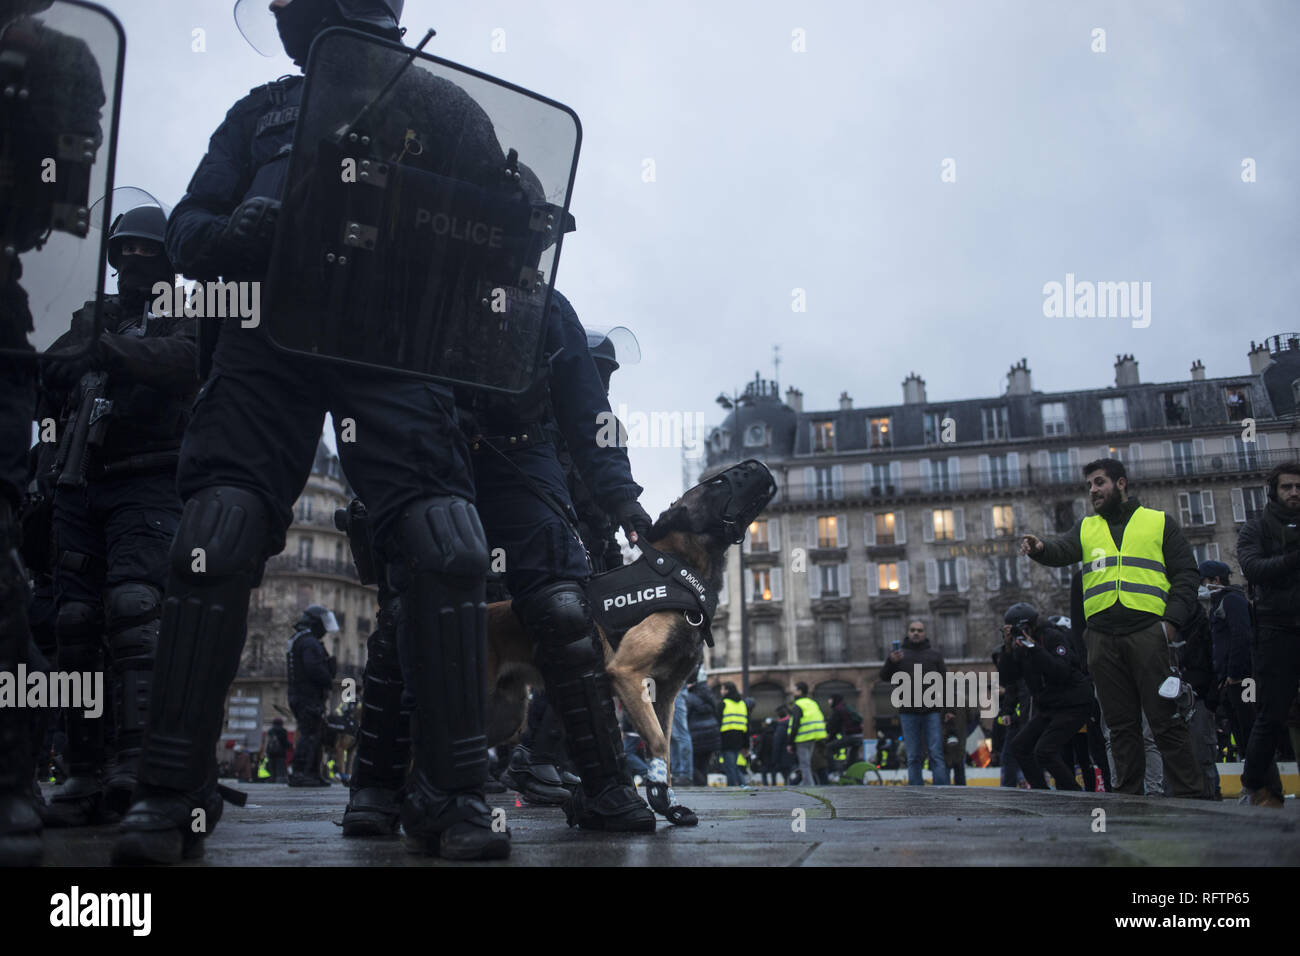 Paris, Ile de France, France. 26th Jan, 2019. A police dog is seen barking along with the riot police during a demonstration against macron policies. Yellow vest protestors gathered and march on the streets of Paris another Saturday on what they call the Act XI against the French president Emmanuel Macron policies. Credit: Bruno Thevenin/SOPA Images/ZUMA Wire/Alamy Live News Stock Photo